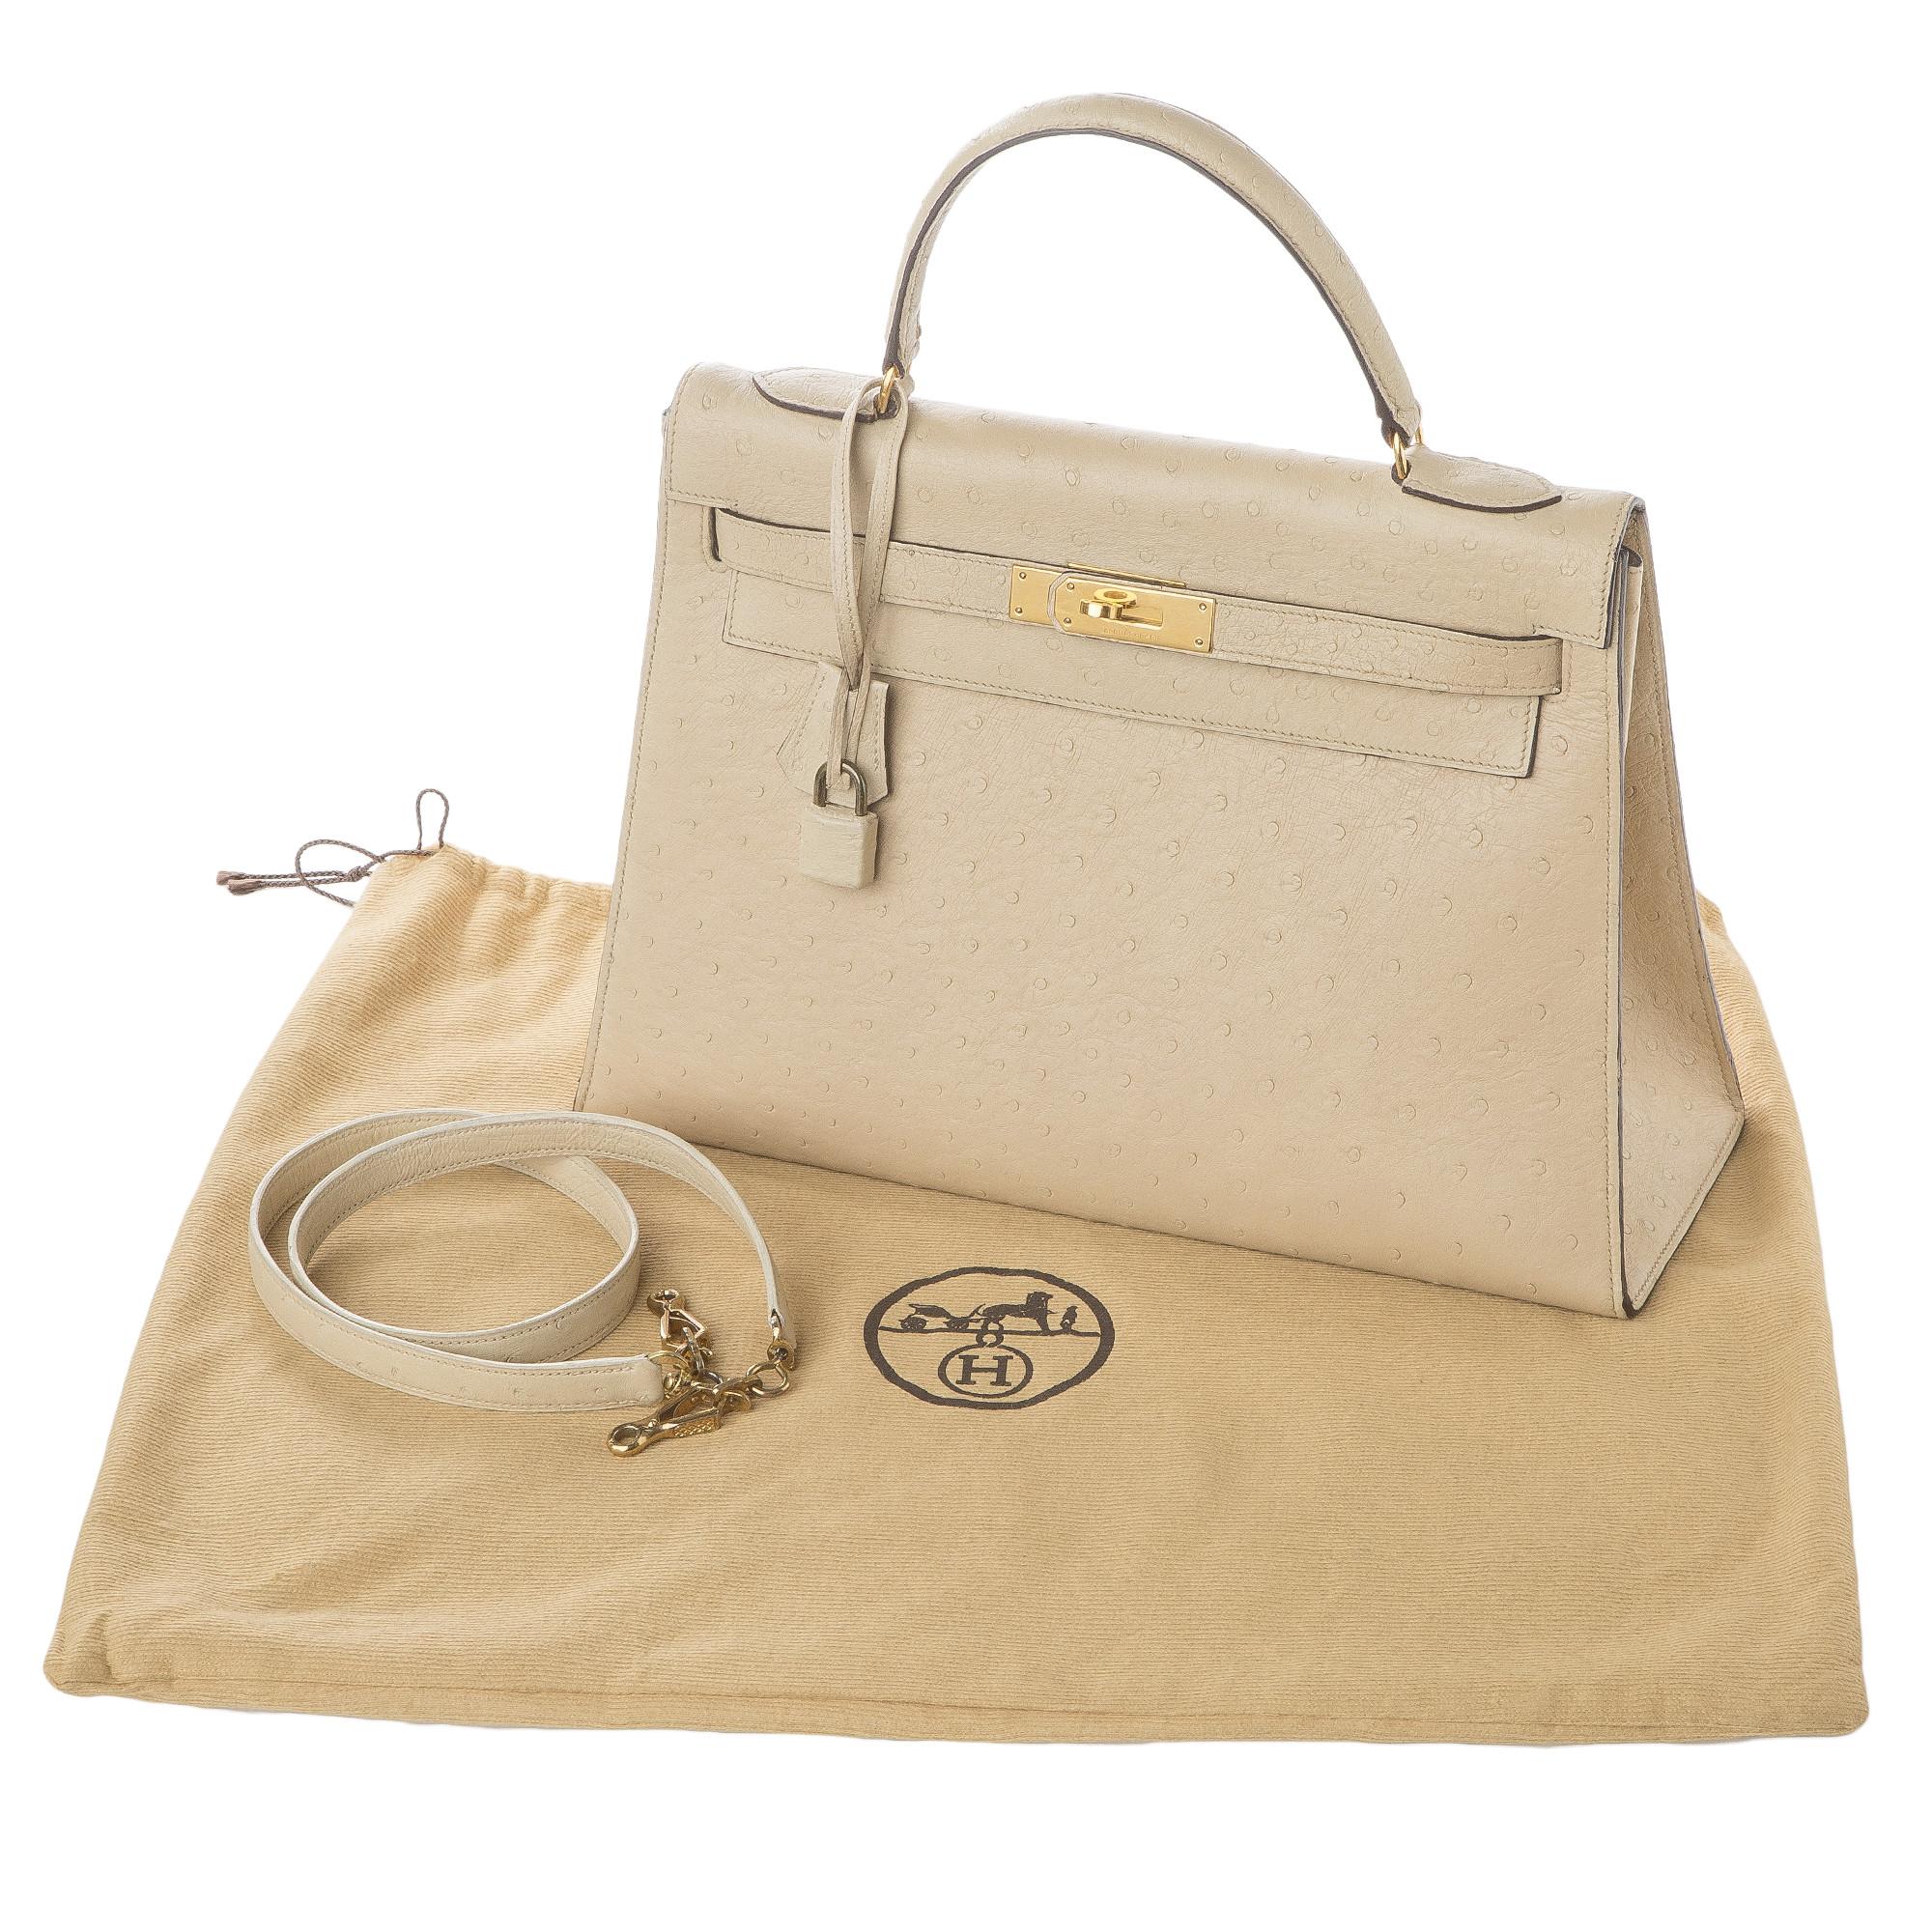 Exquisite vintage Hermés Kelly handbag in tan ostrich with detachable shoulder strap, original Hermés dust bag and gold tone hardware, lock, clochette and key.  

This is not your typical Hermes bag, this fine vintage example is something special